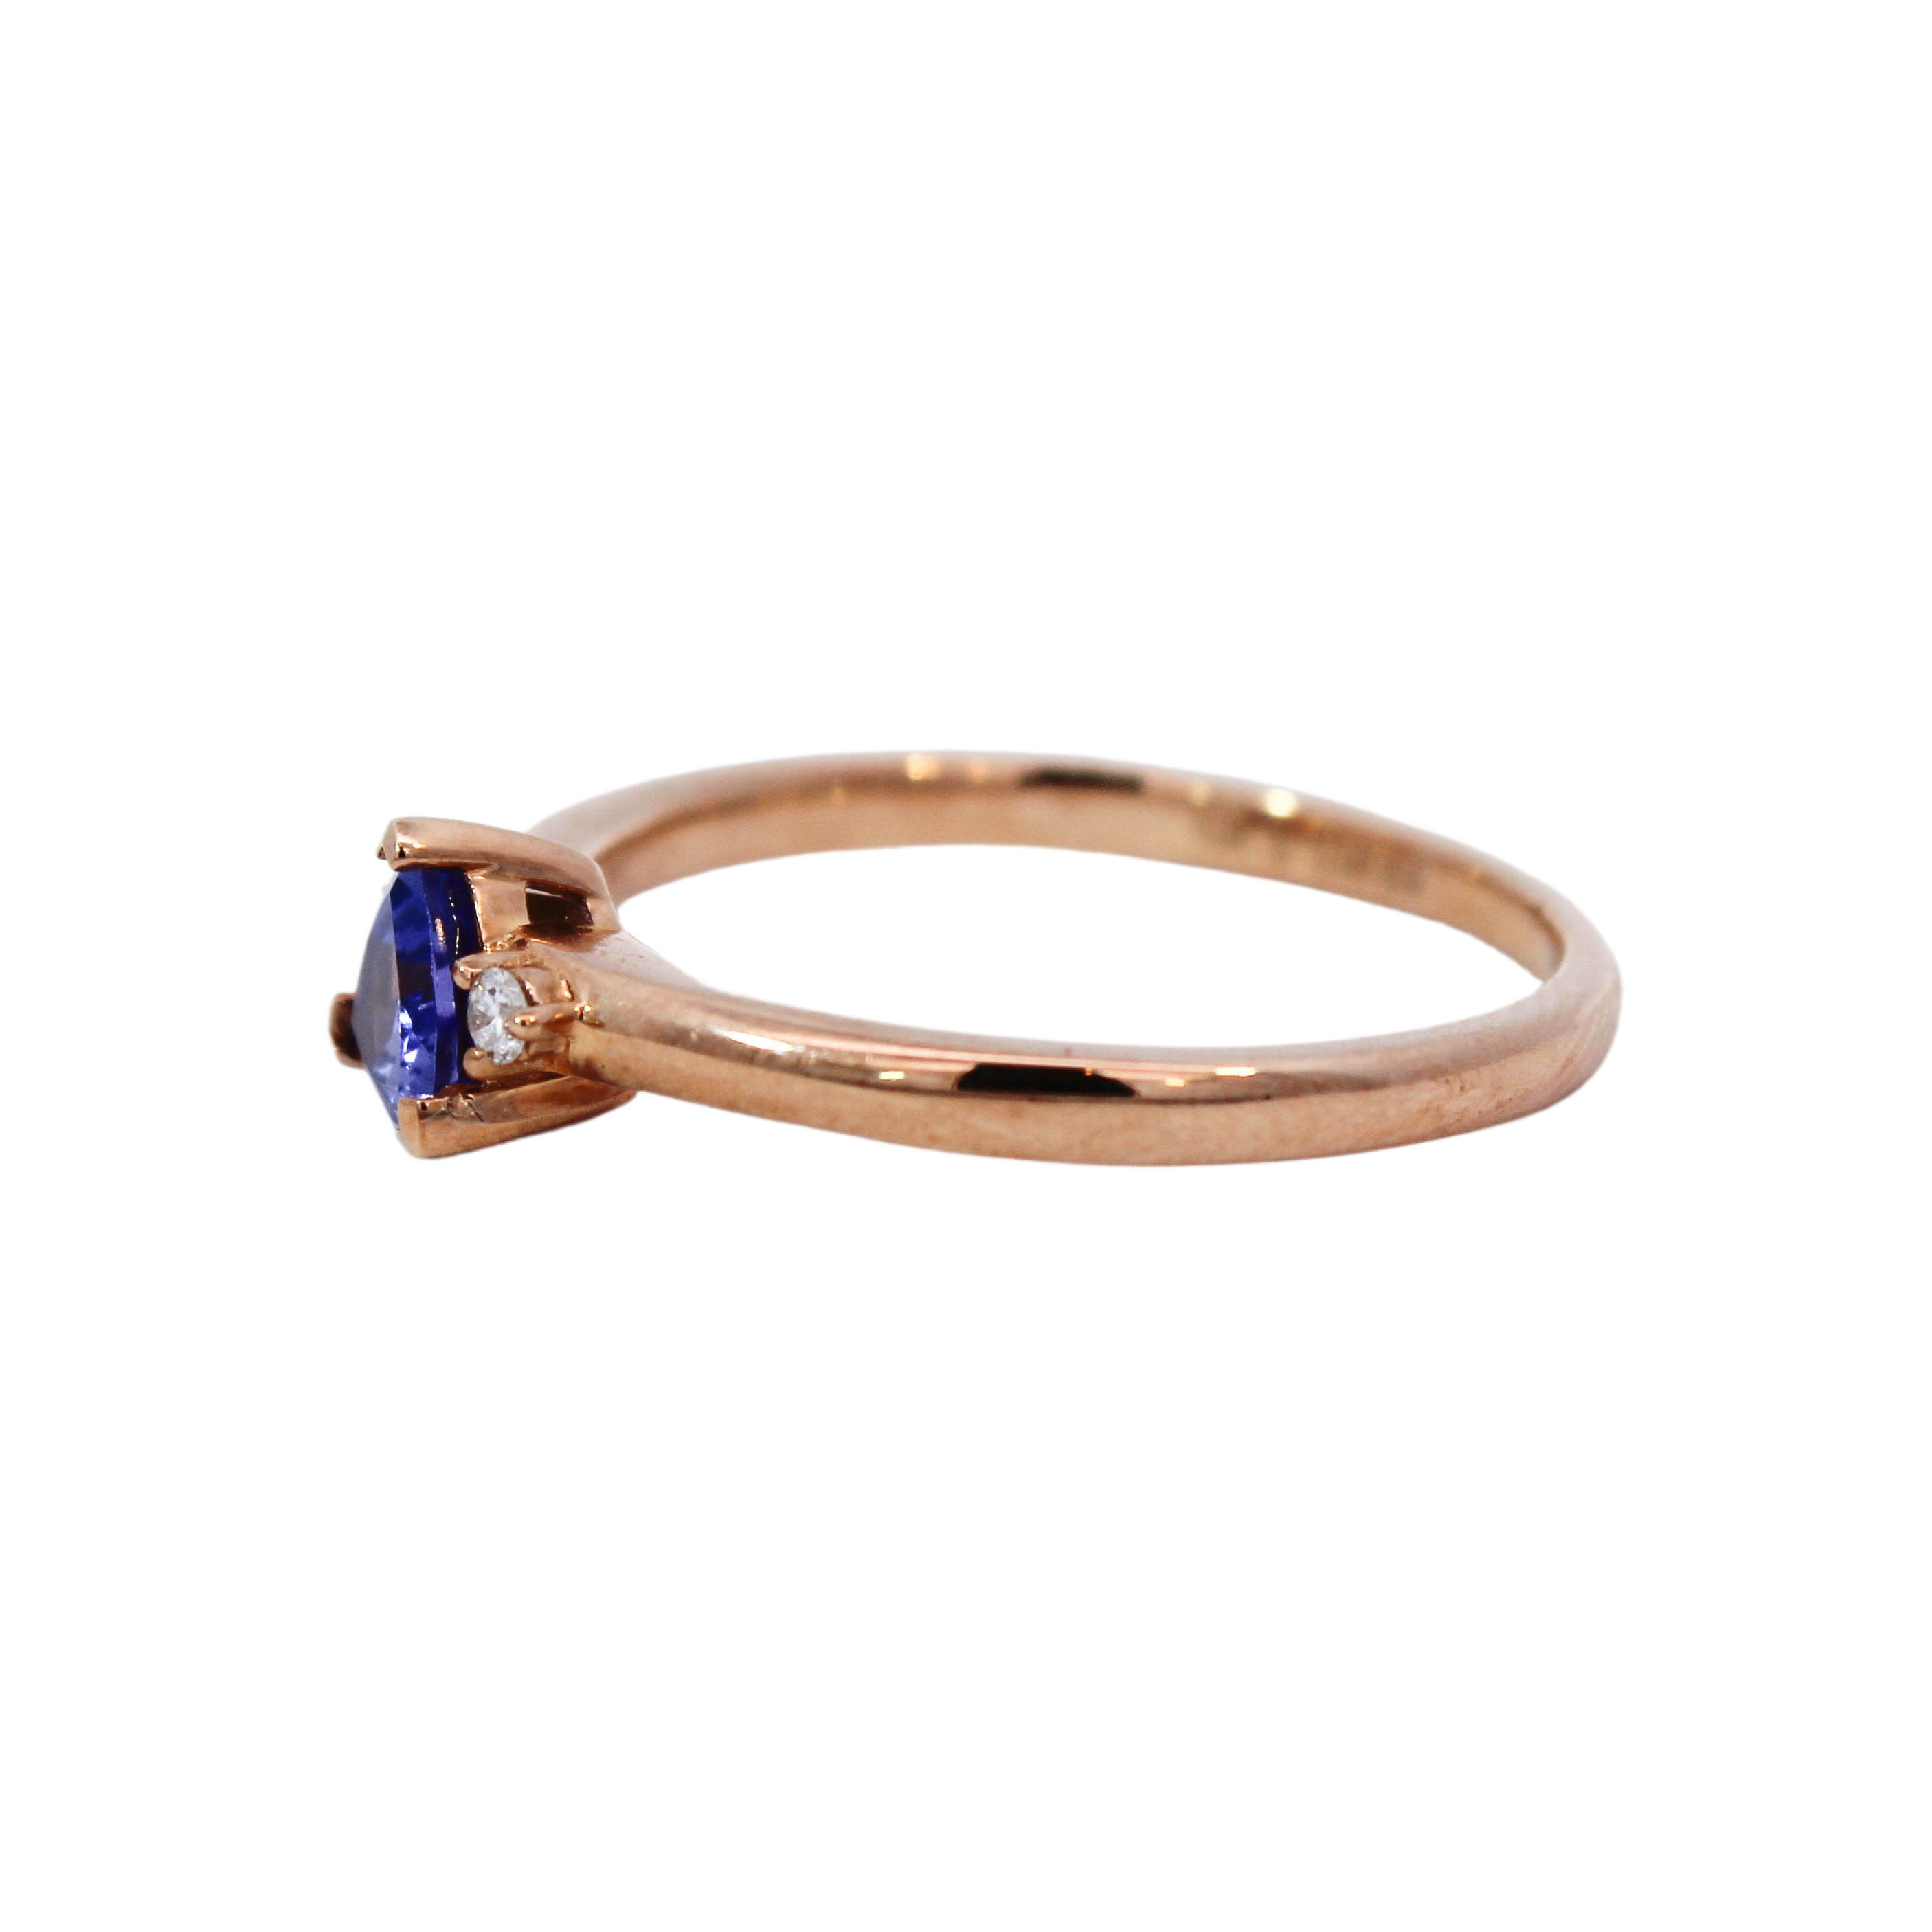 Tanzanite Jewellery and Rings Cape Town